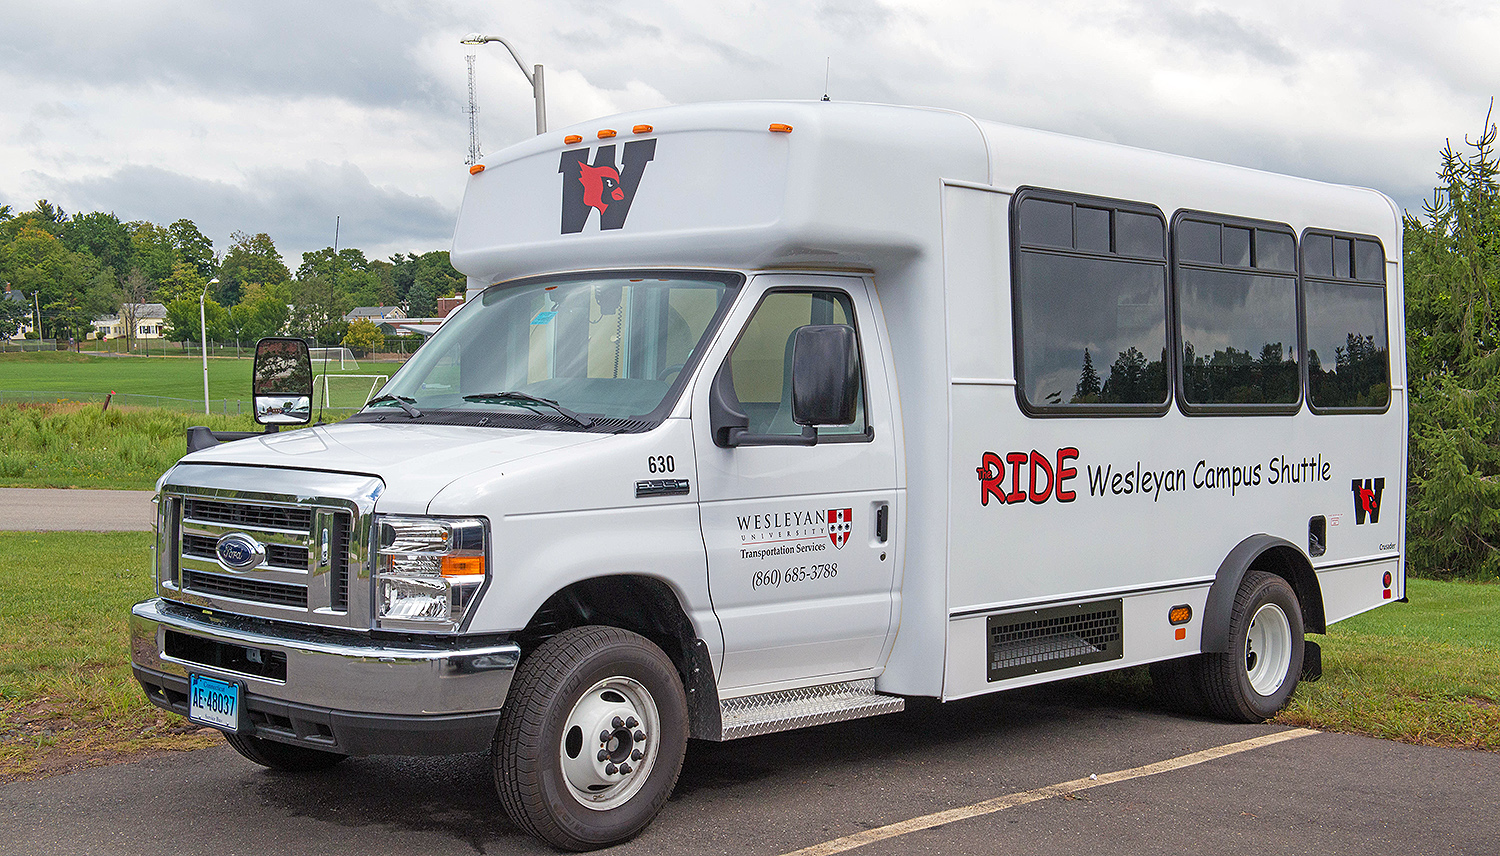 Wesleyan’s Transportation Department announces the addition of a new 14-passenger bus to the Wesleyan RIDE system fleet.